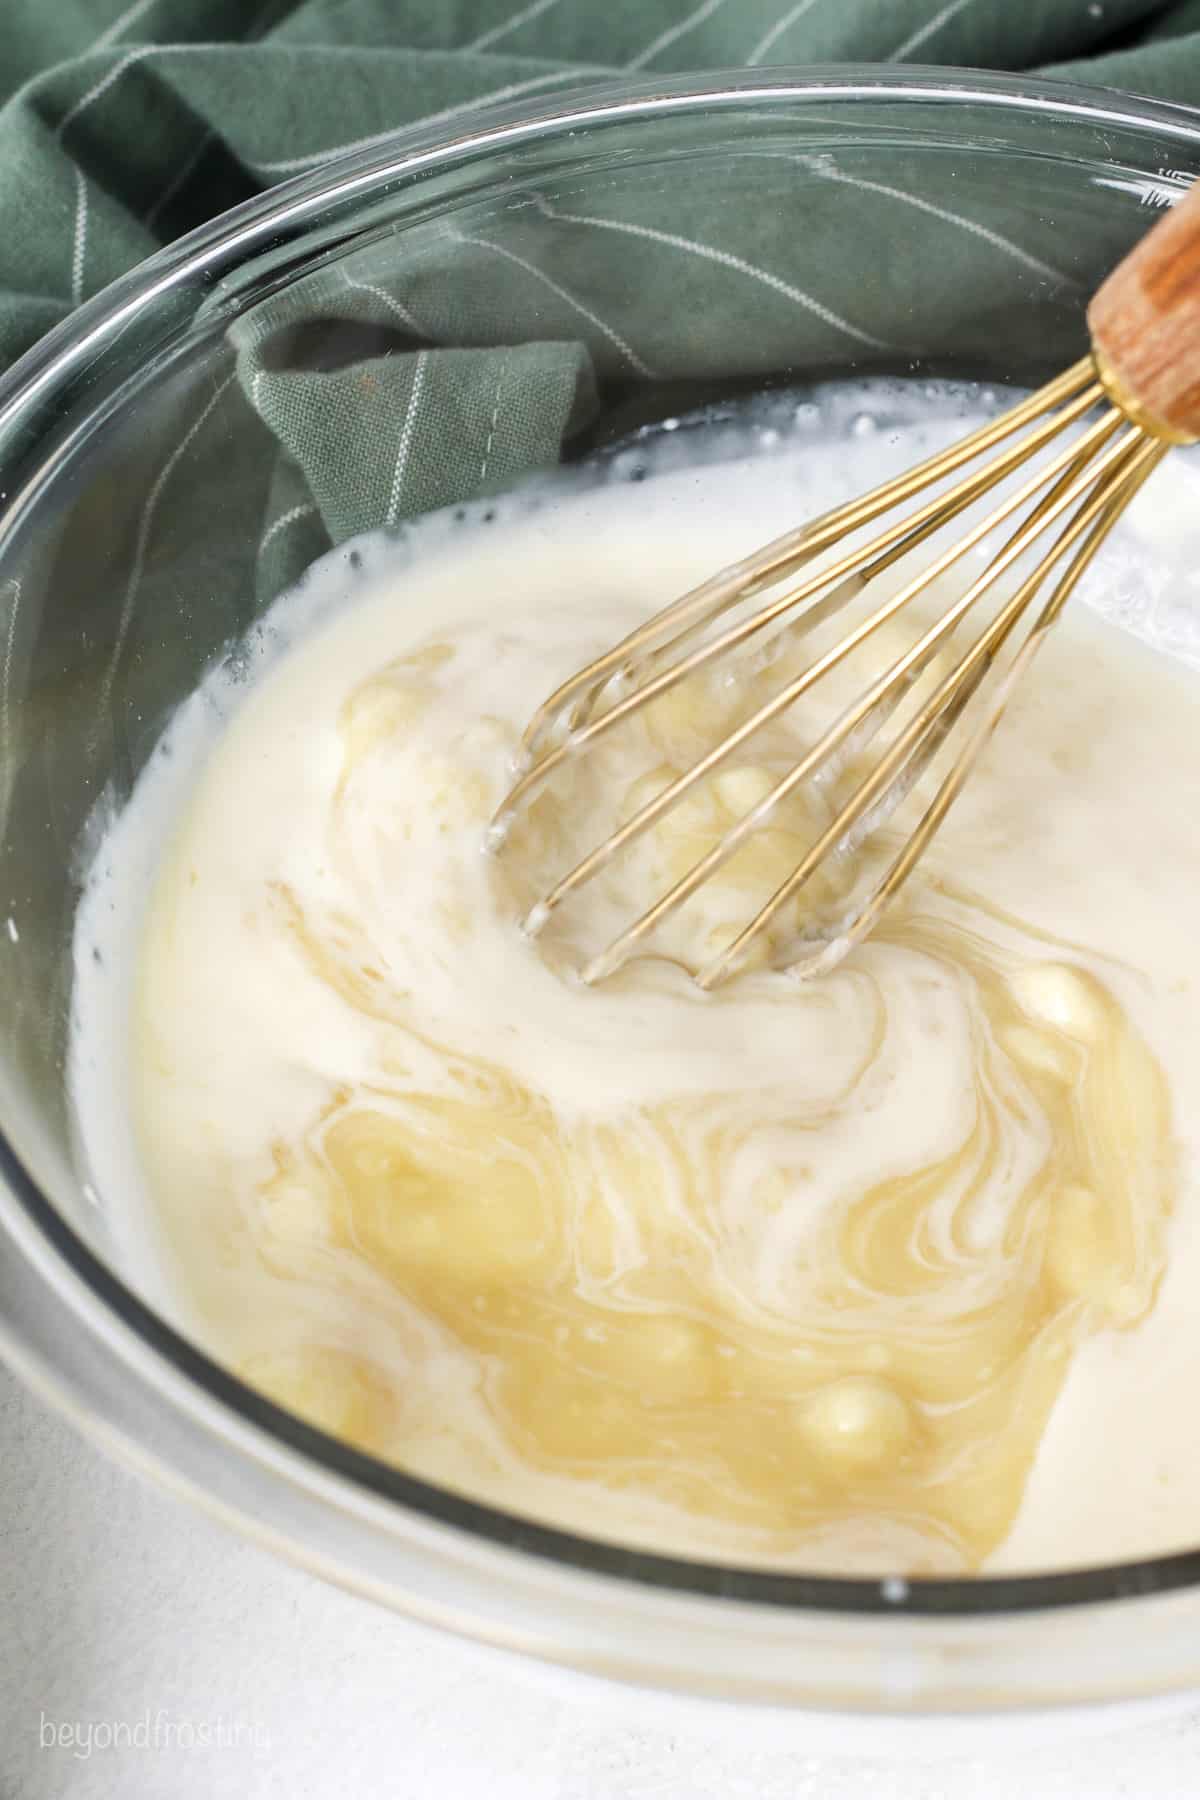 Melted white chocolate and heavy cream are whisked together in a glass bowl.